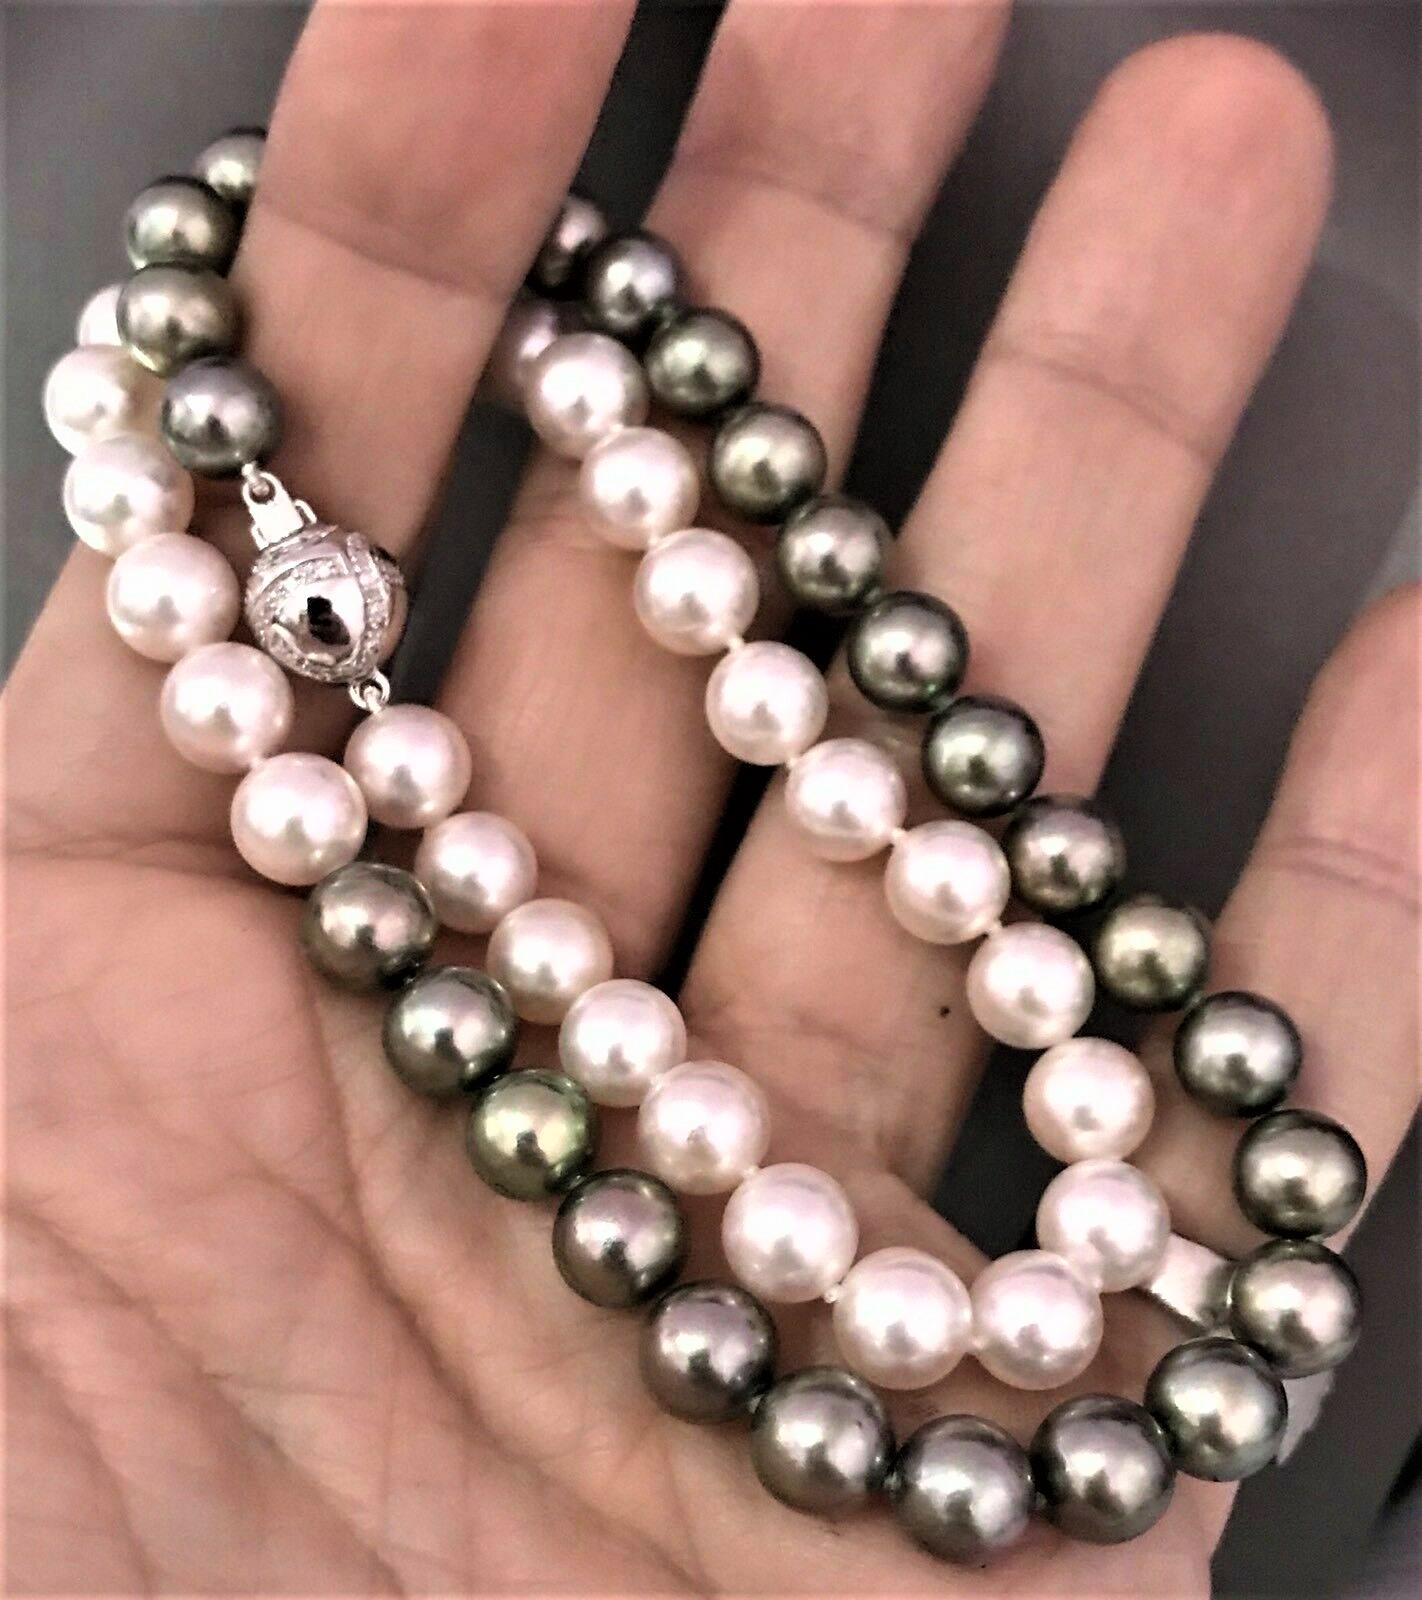 CERTIFIED $4,950 Fine Quality AKOYA AND TAHITIAN SALTWATER 8-7.50 MM 14 KT 17 3/4 INCH PEARL HI FASHION CUSTOM MADE PRINCESS NECKLACE
This is a One of a Kind Unique Custom Made Glamorous Piece of Jewelry!

Nothing says, “I Love you” more than